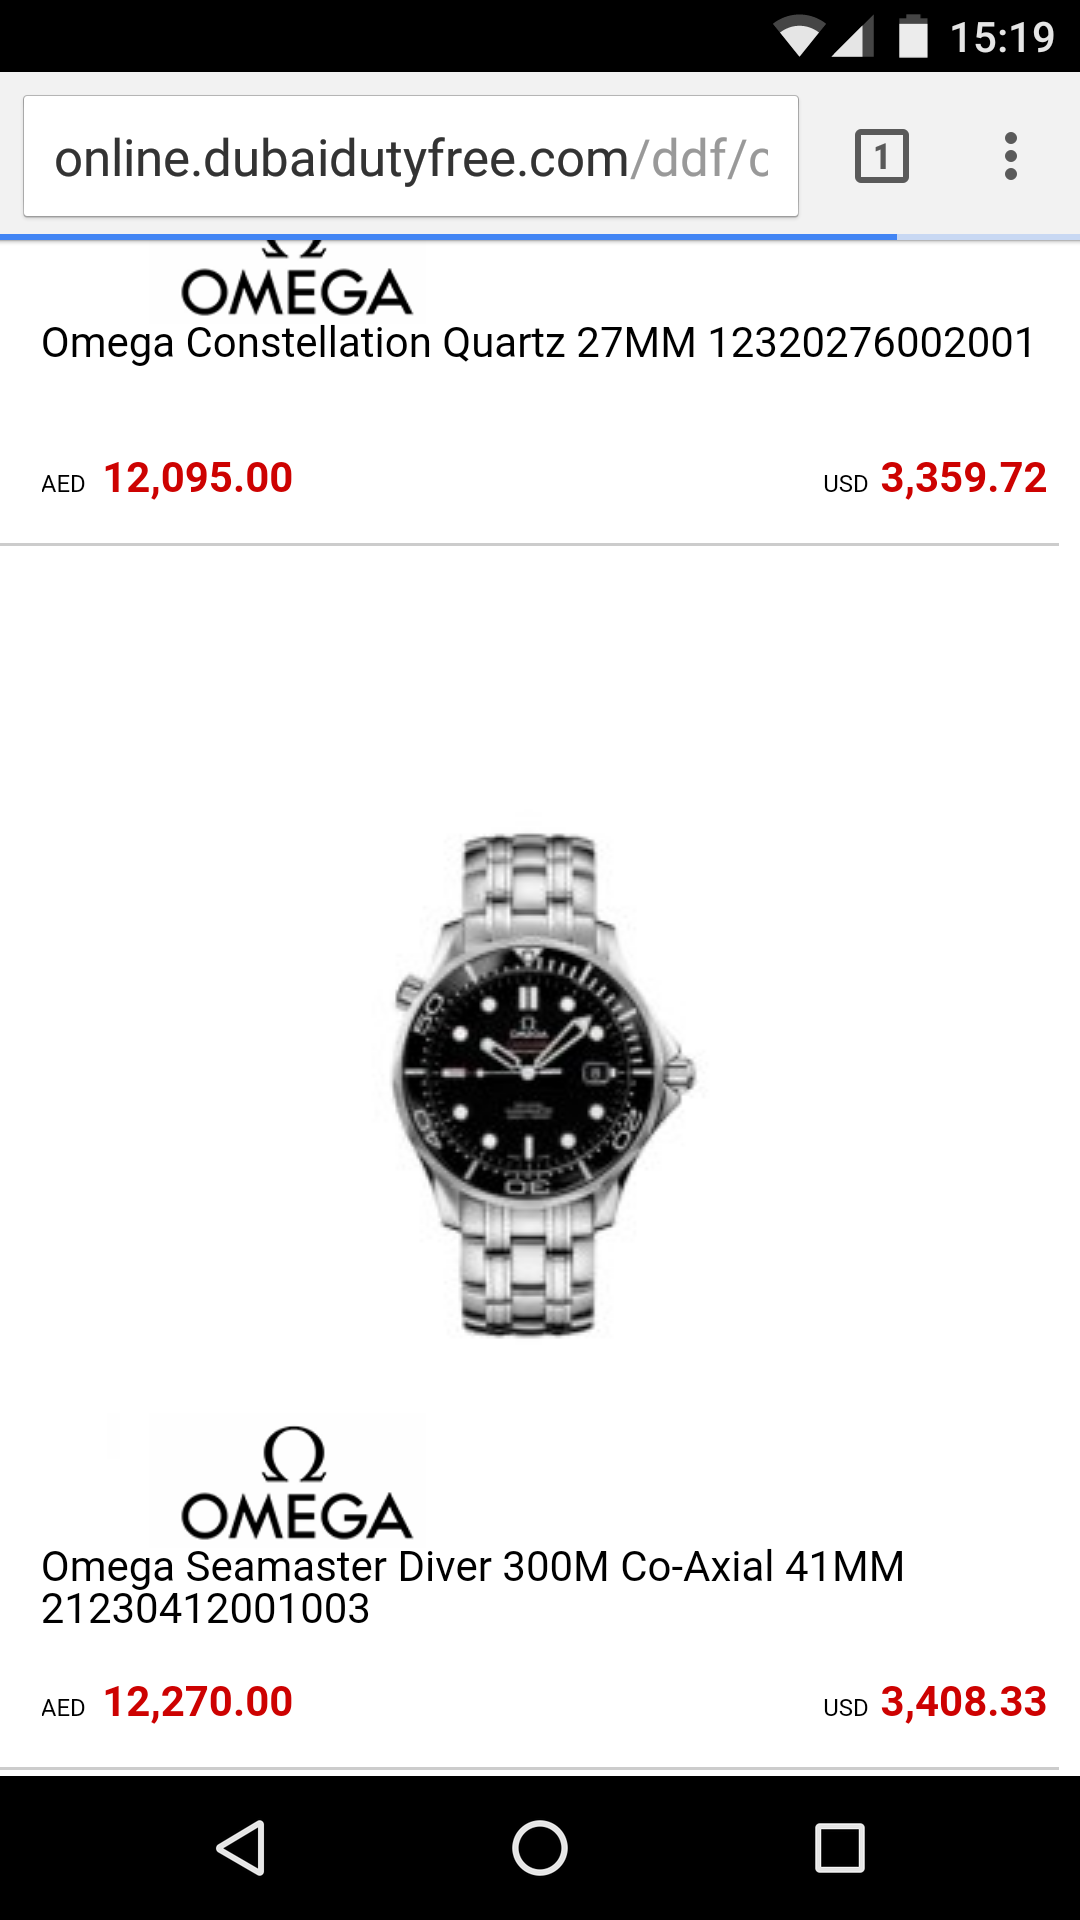 cheapest country to buy omega watches